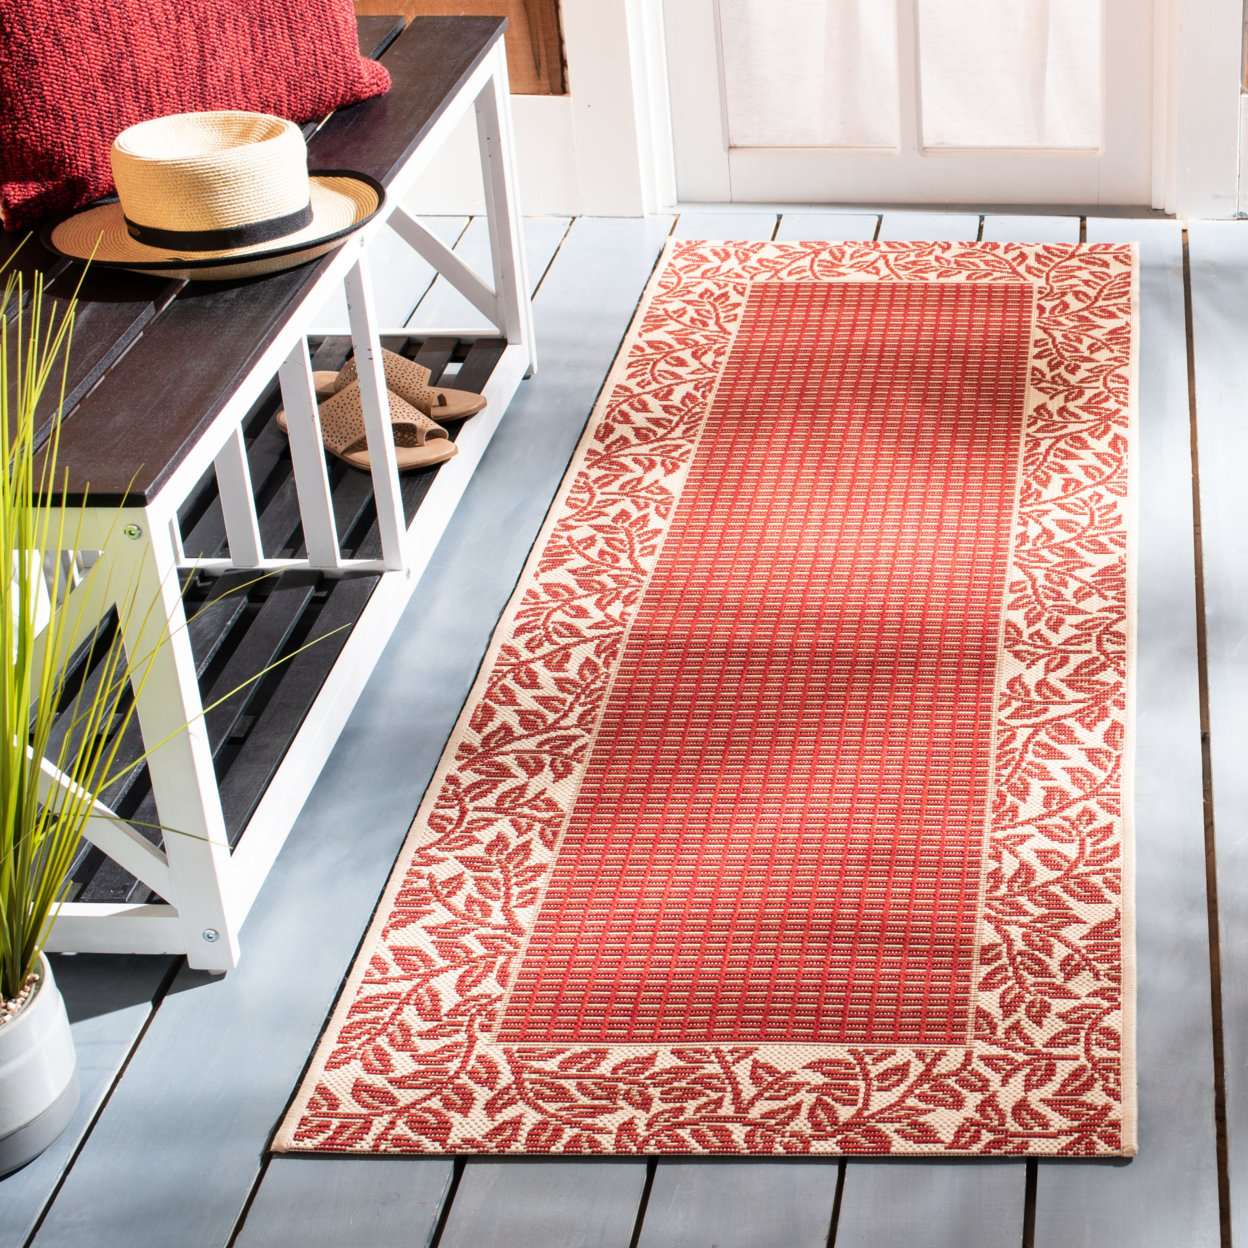 SAFAVIEH Courtyard CY0727-3707 Red / Natural Rug - 5' 3 X 7' 7